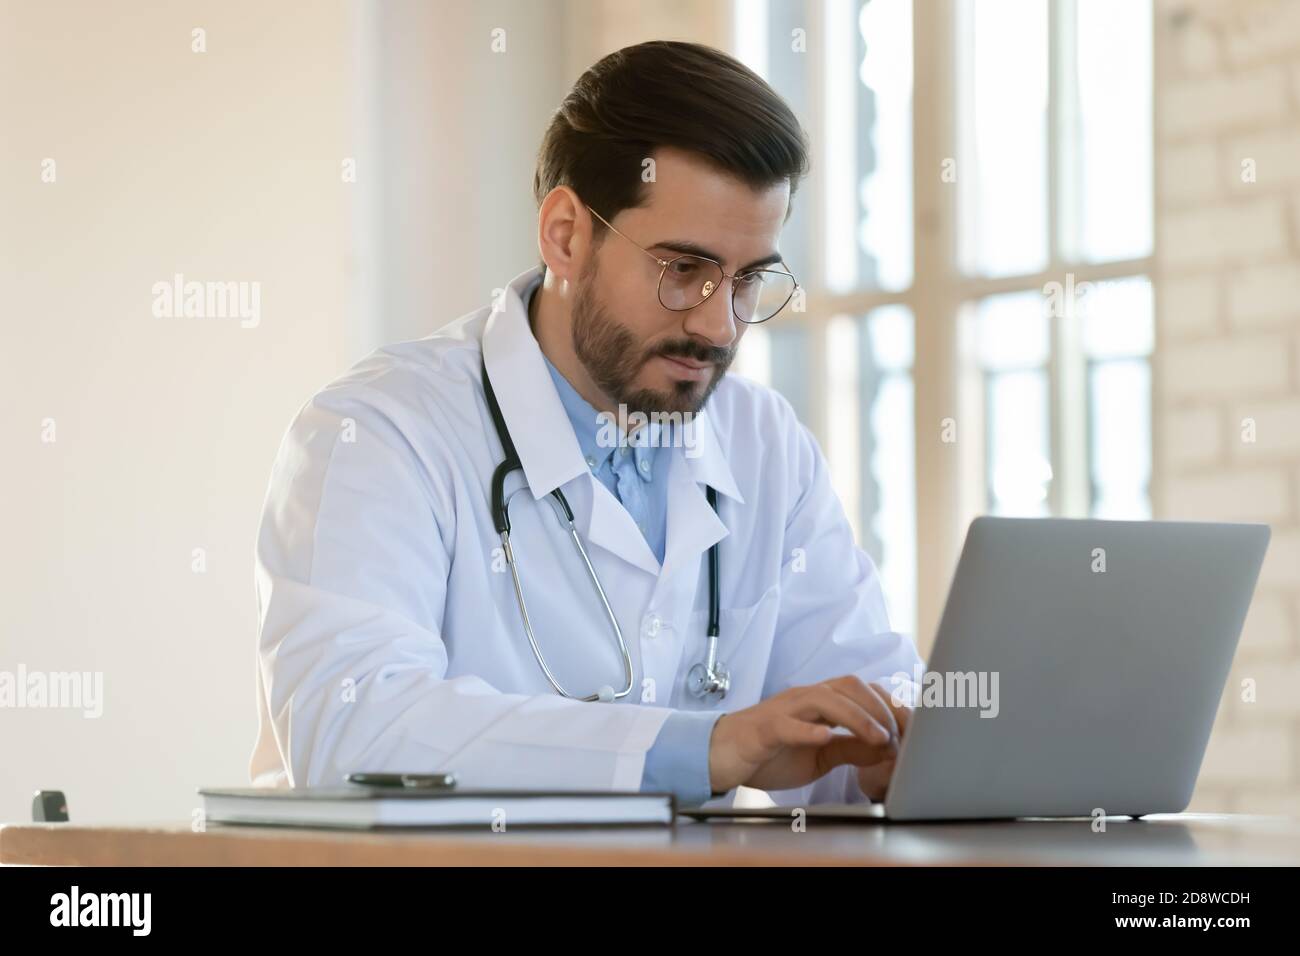 Inspired millennial doctor using computer to read medical literature online Stock Photo